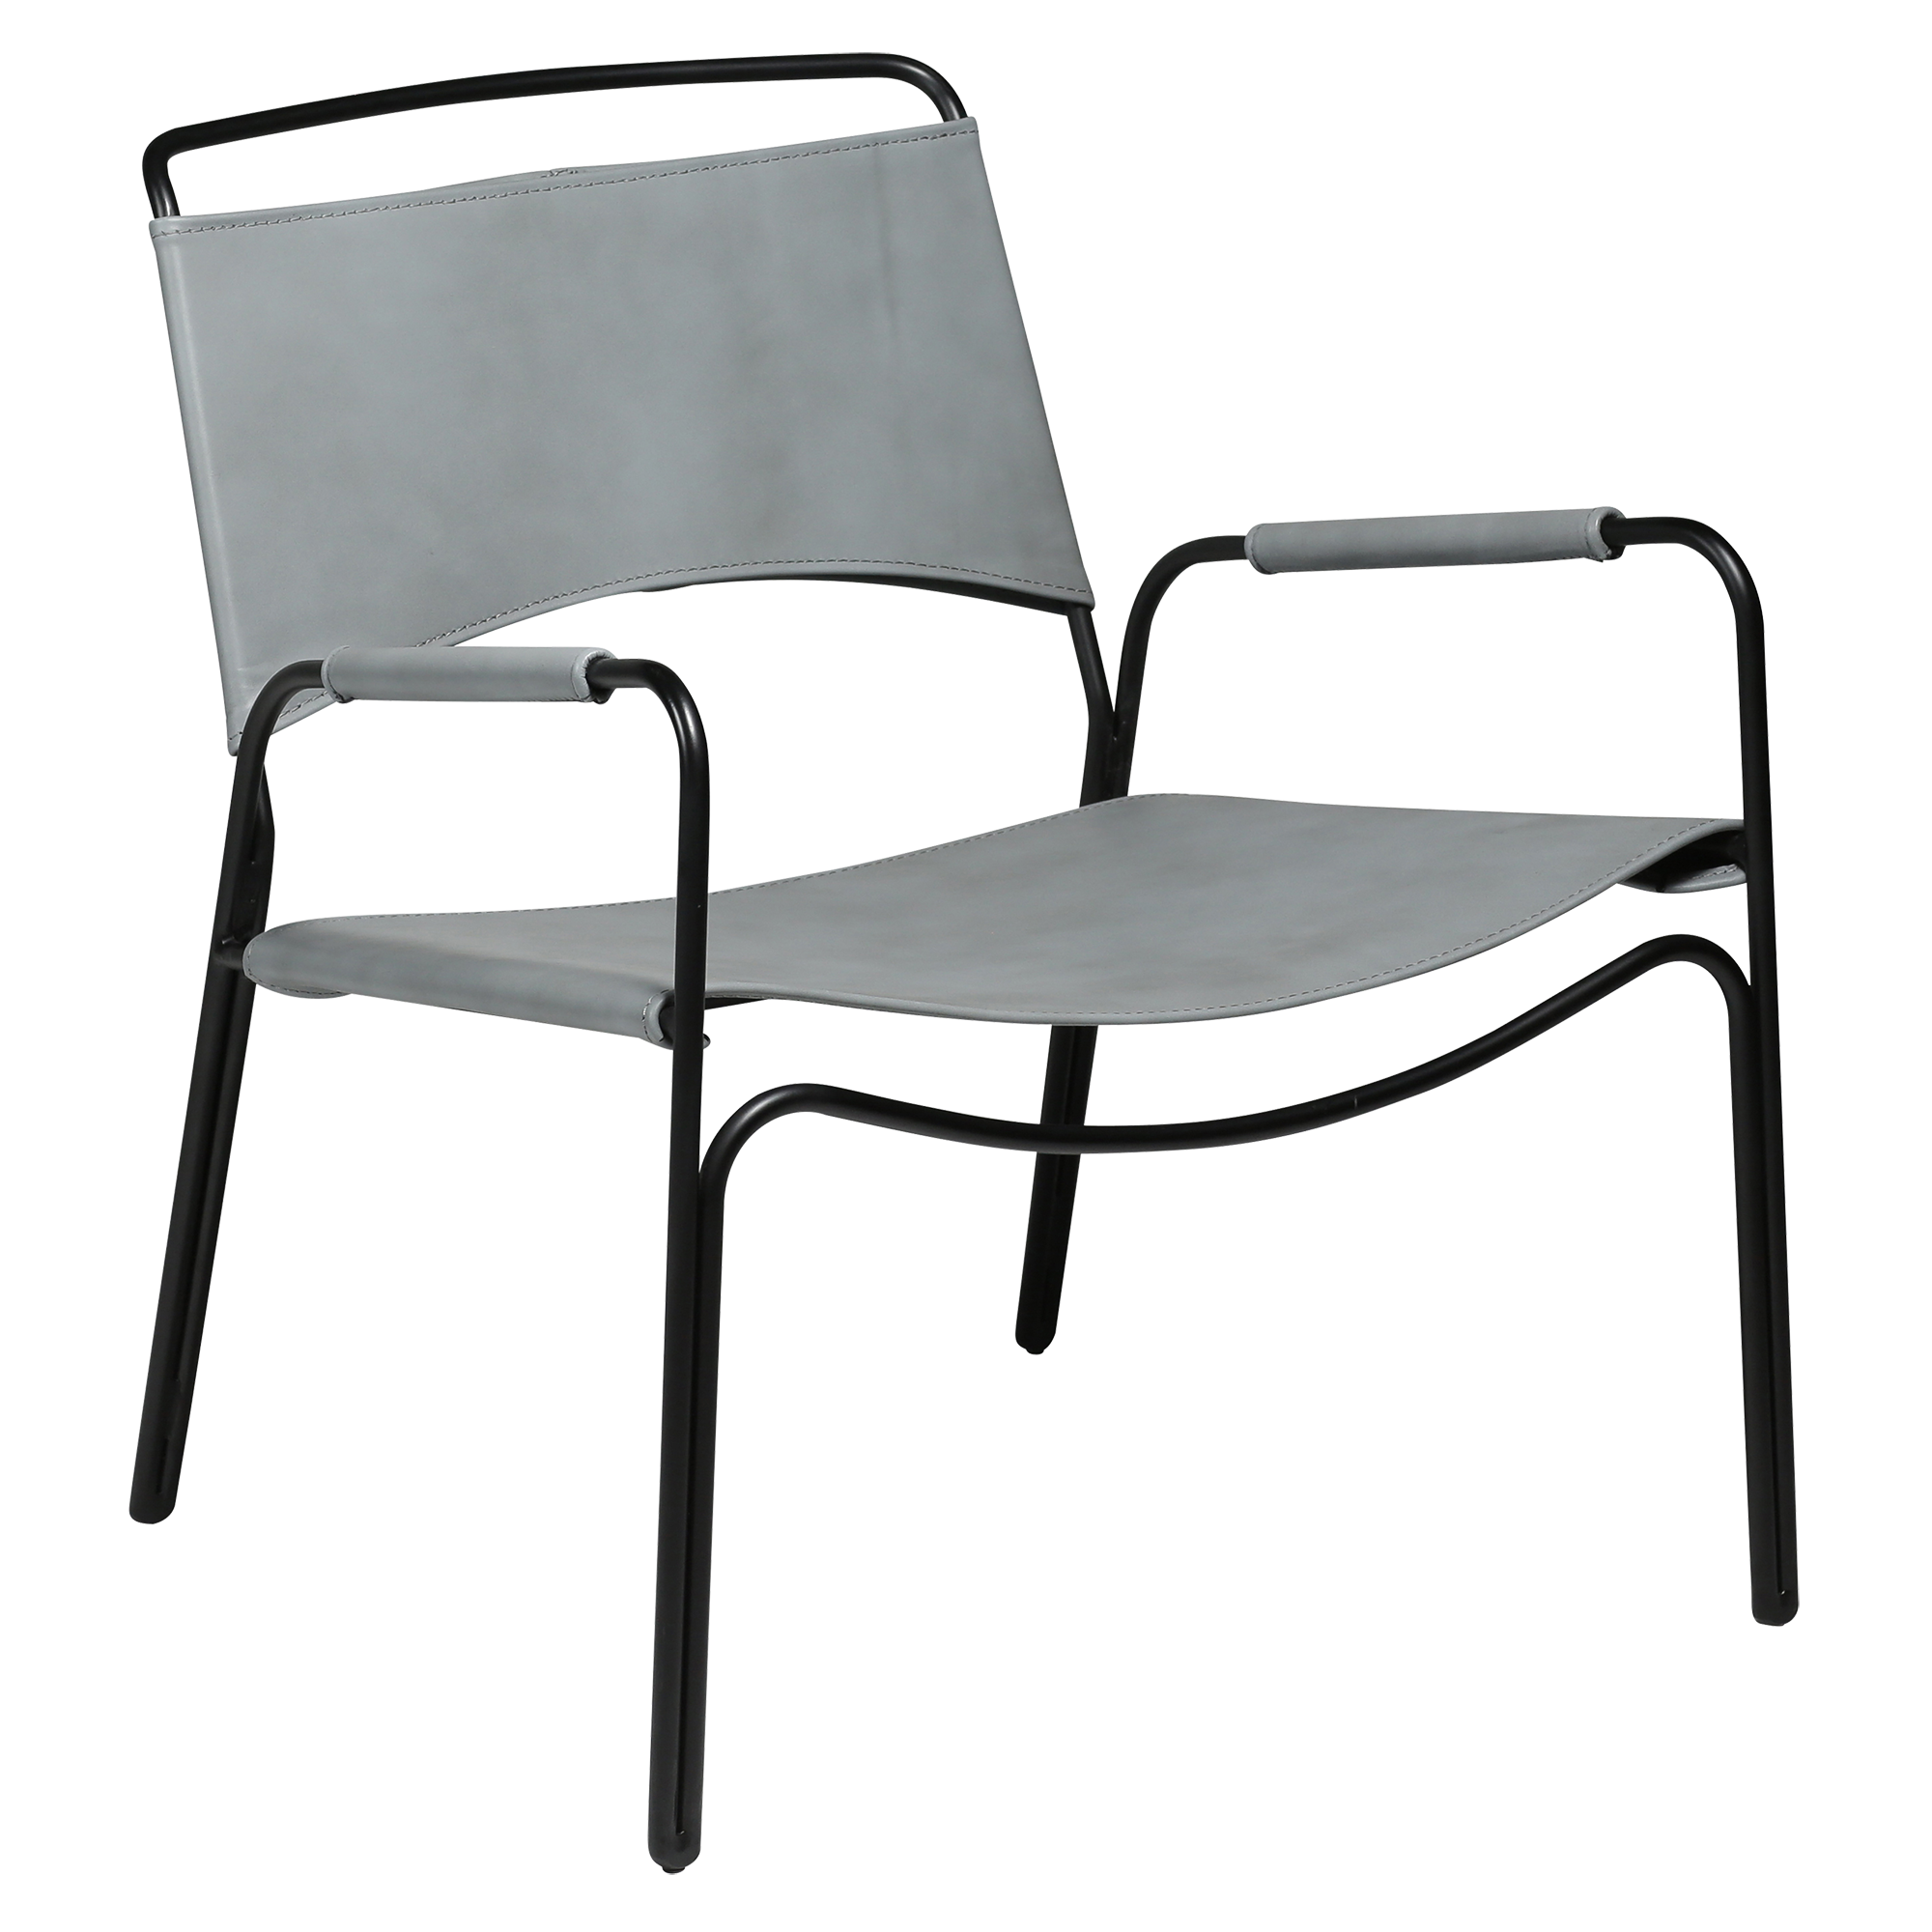 Paz Lounge Chair Grey Leather With Black Metal Legs 700801903 01 Main